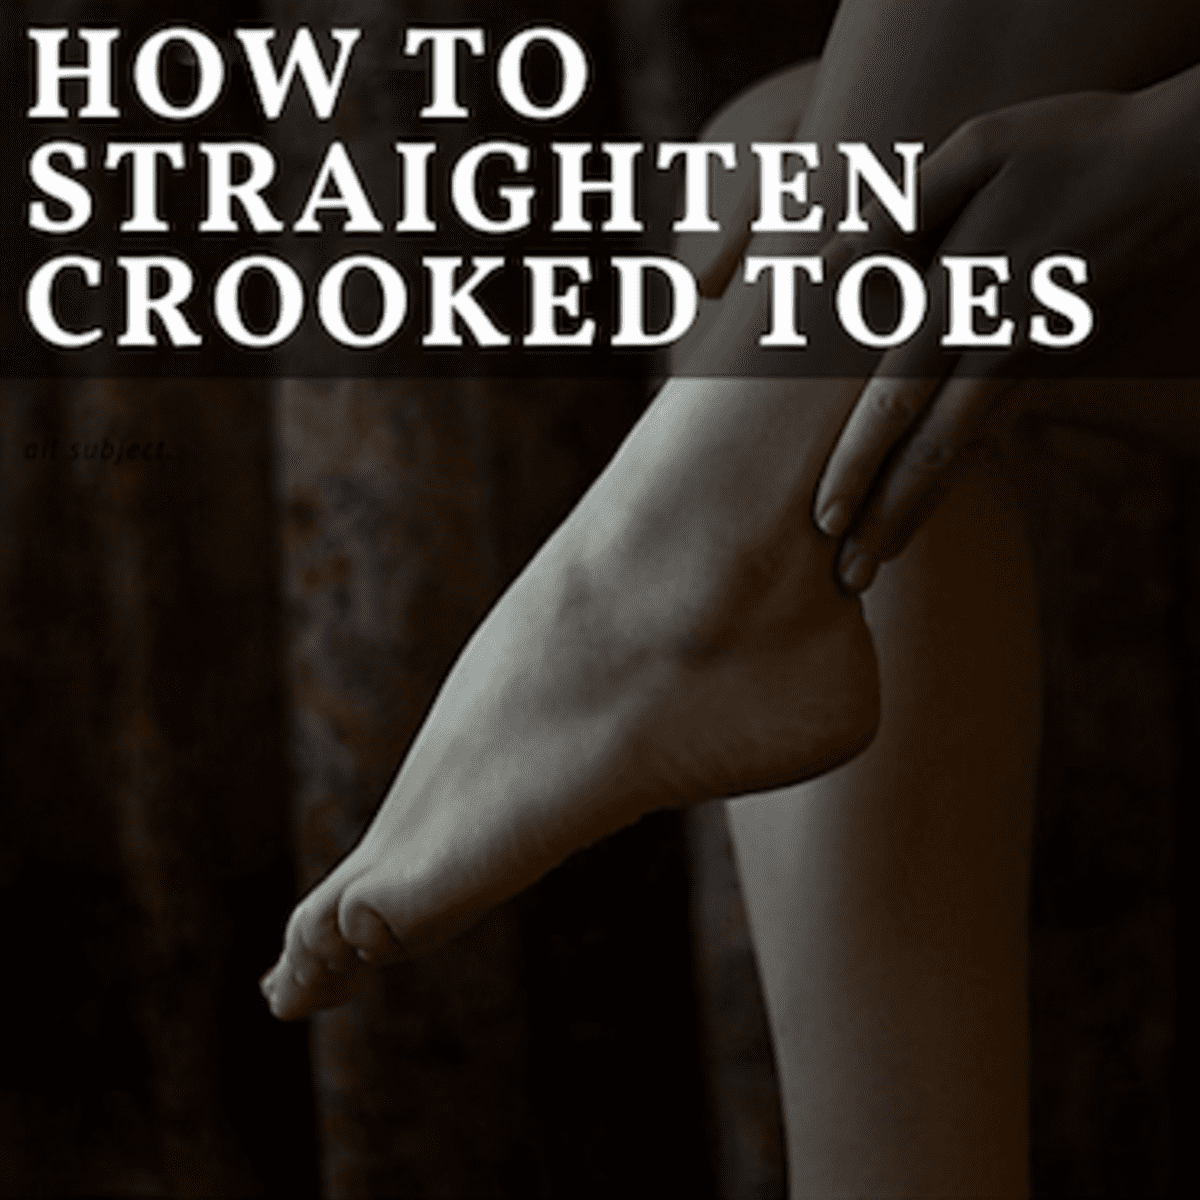 How to Straighten Crooked Toes Without Surgery - RemedyGrove